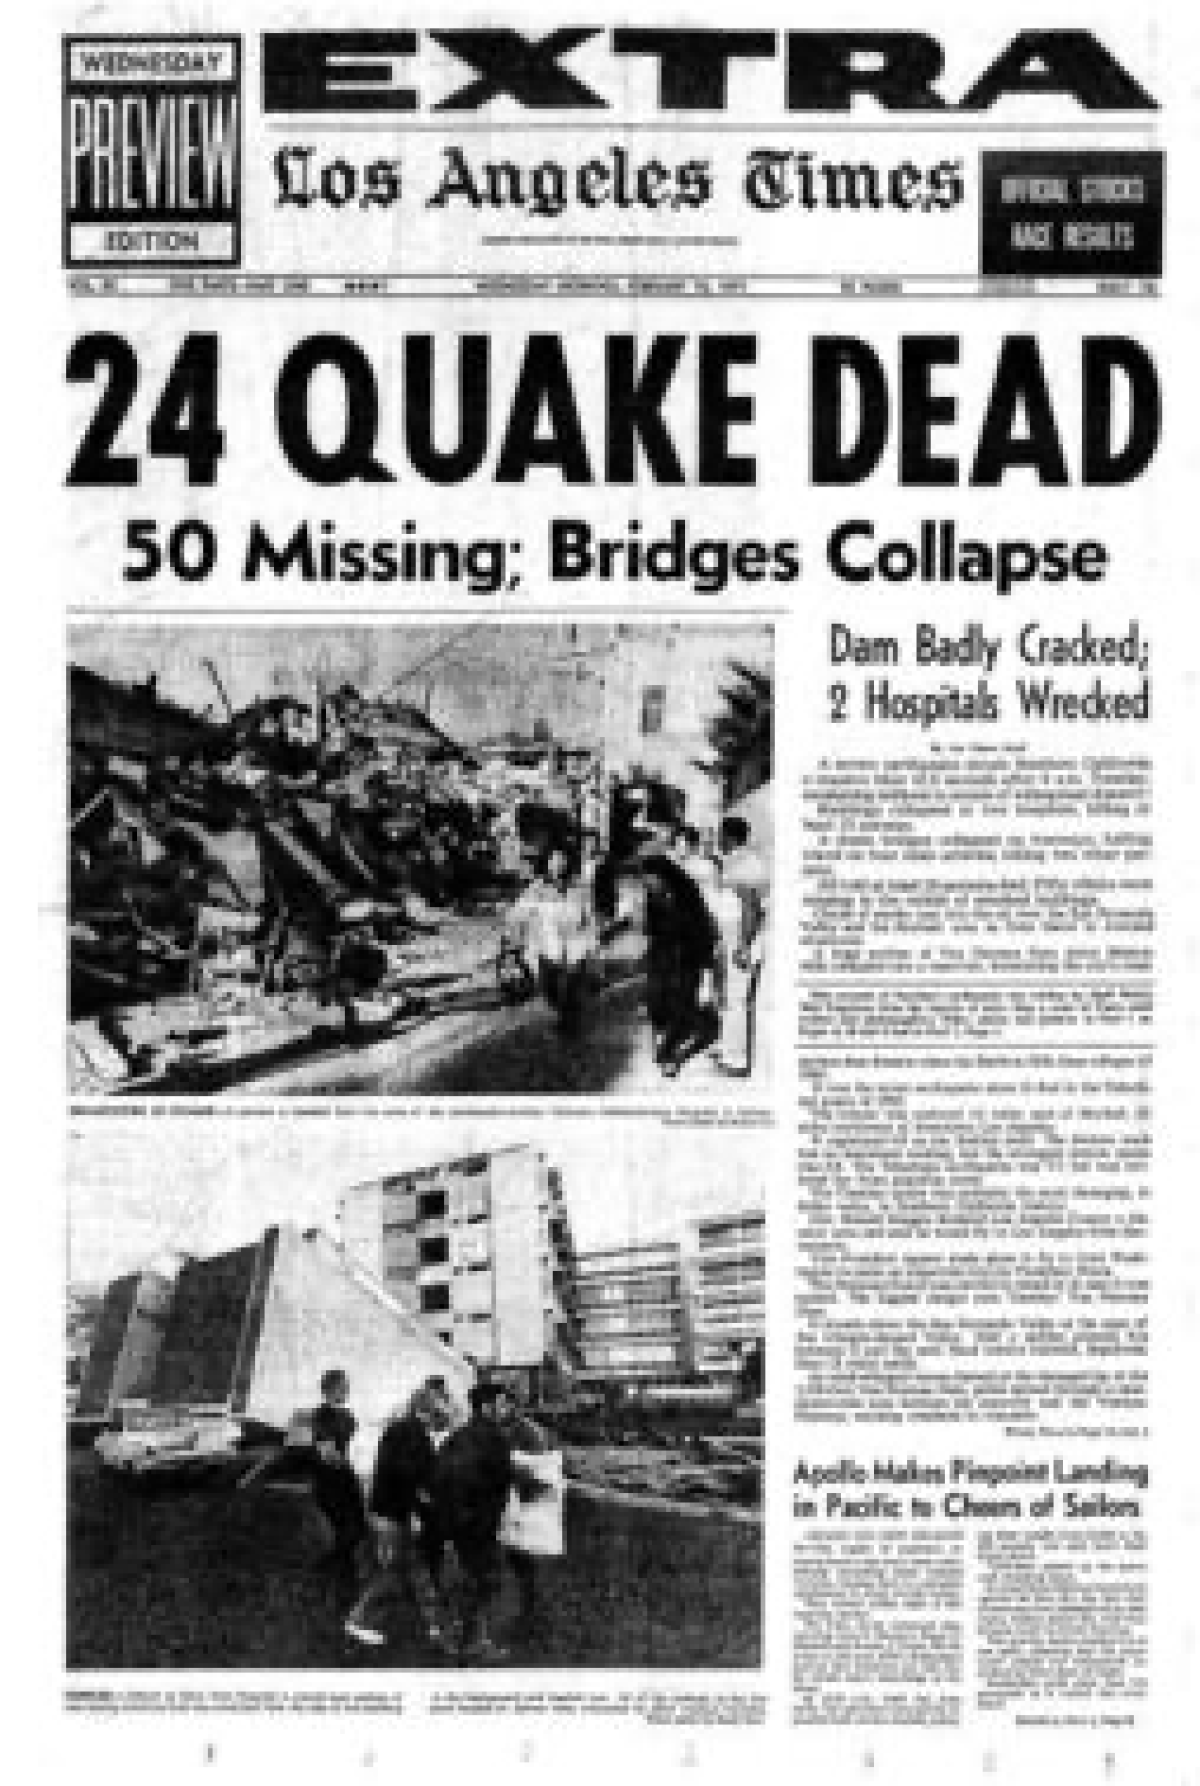 The front page of the L.A. Times on Feb. 10, 1971.